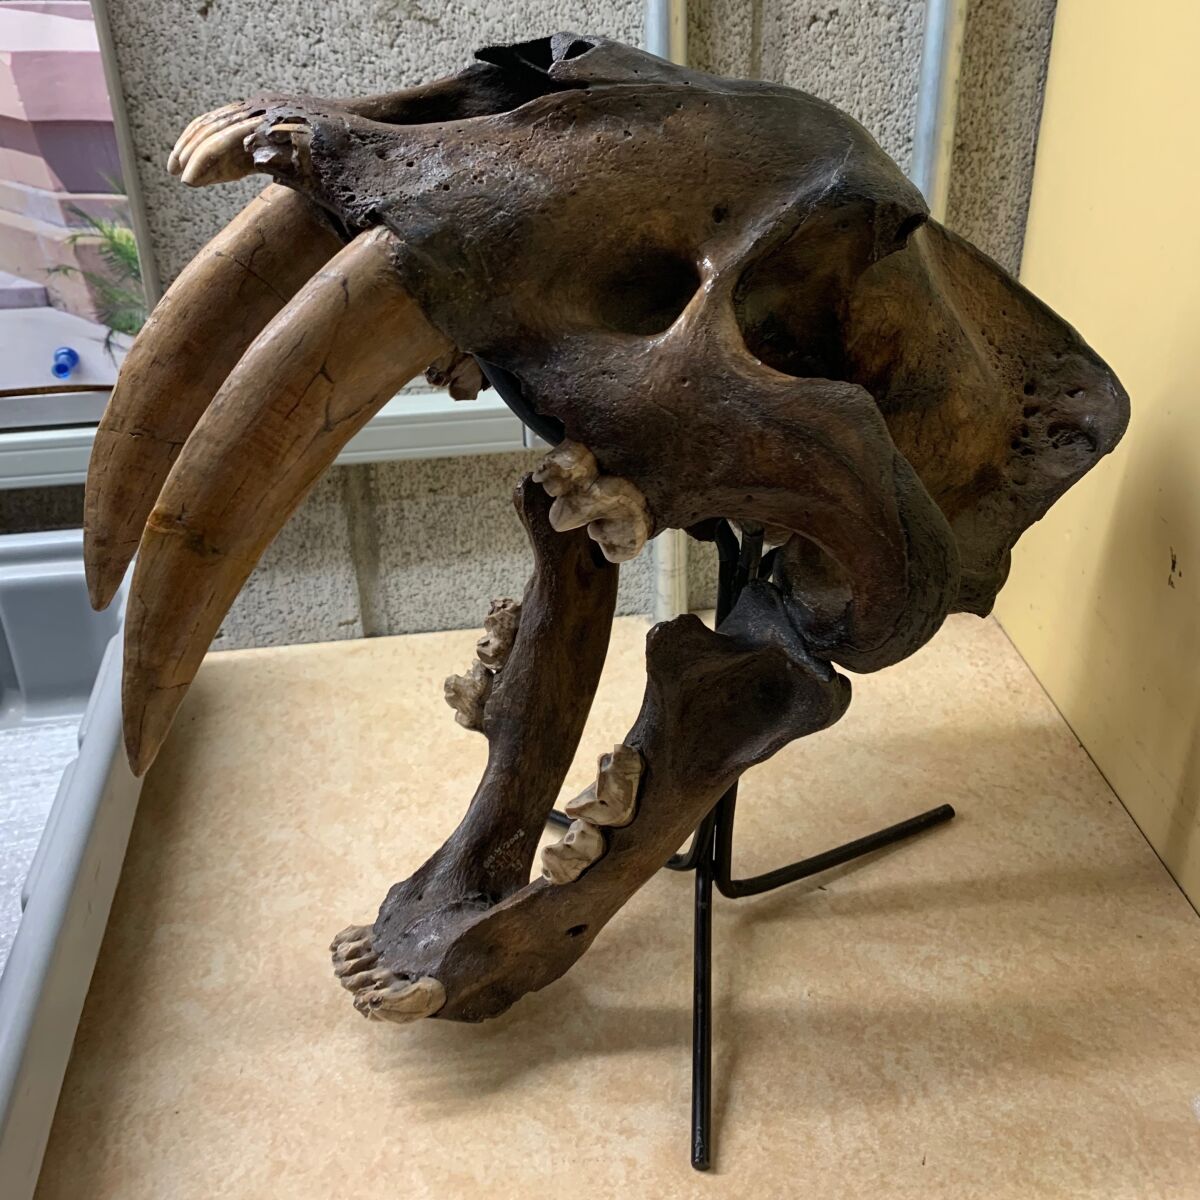 The skull of a saber-toothed cat.